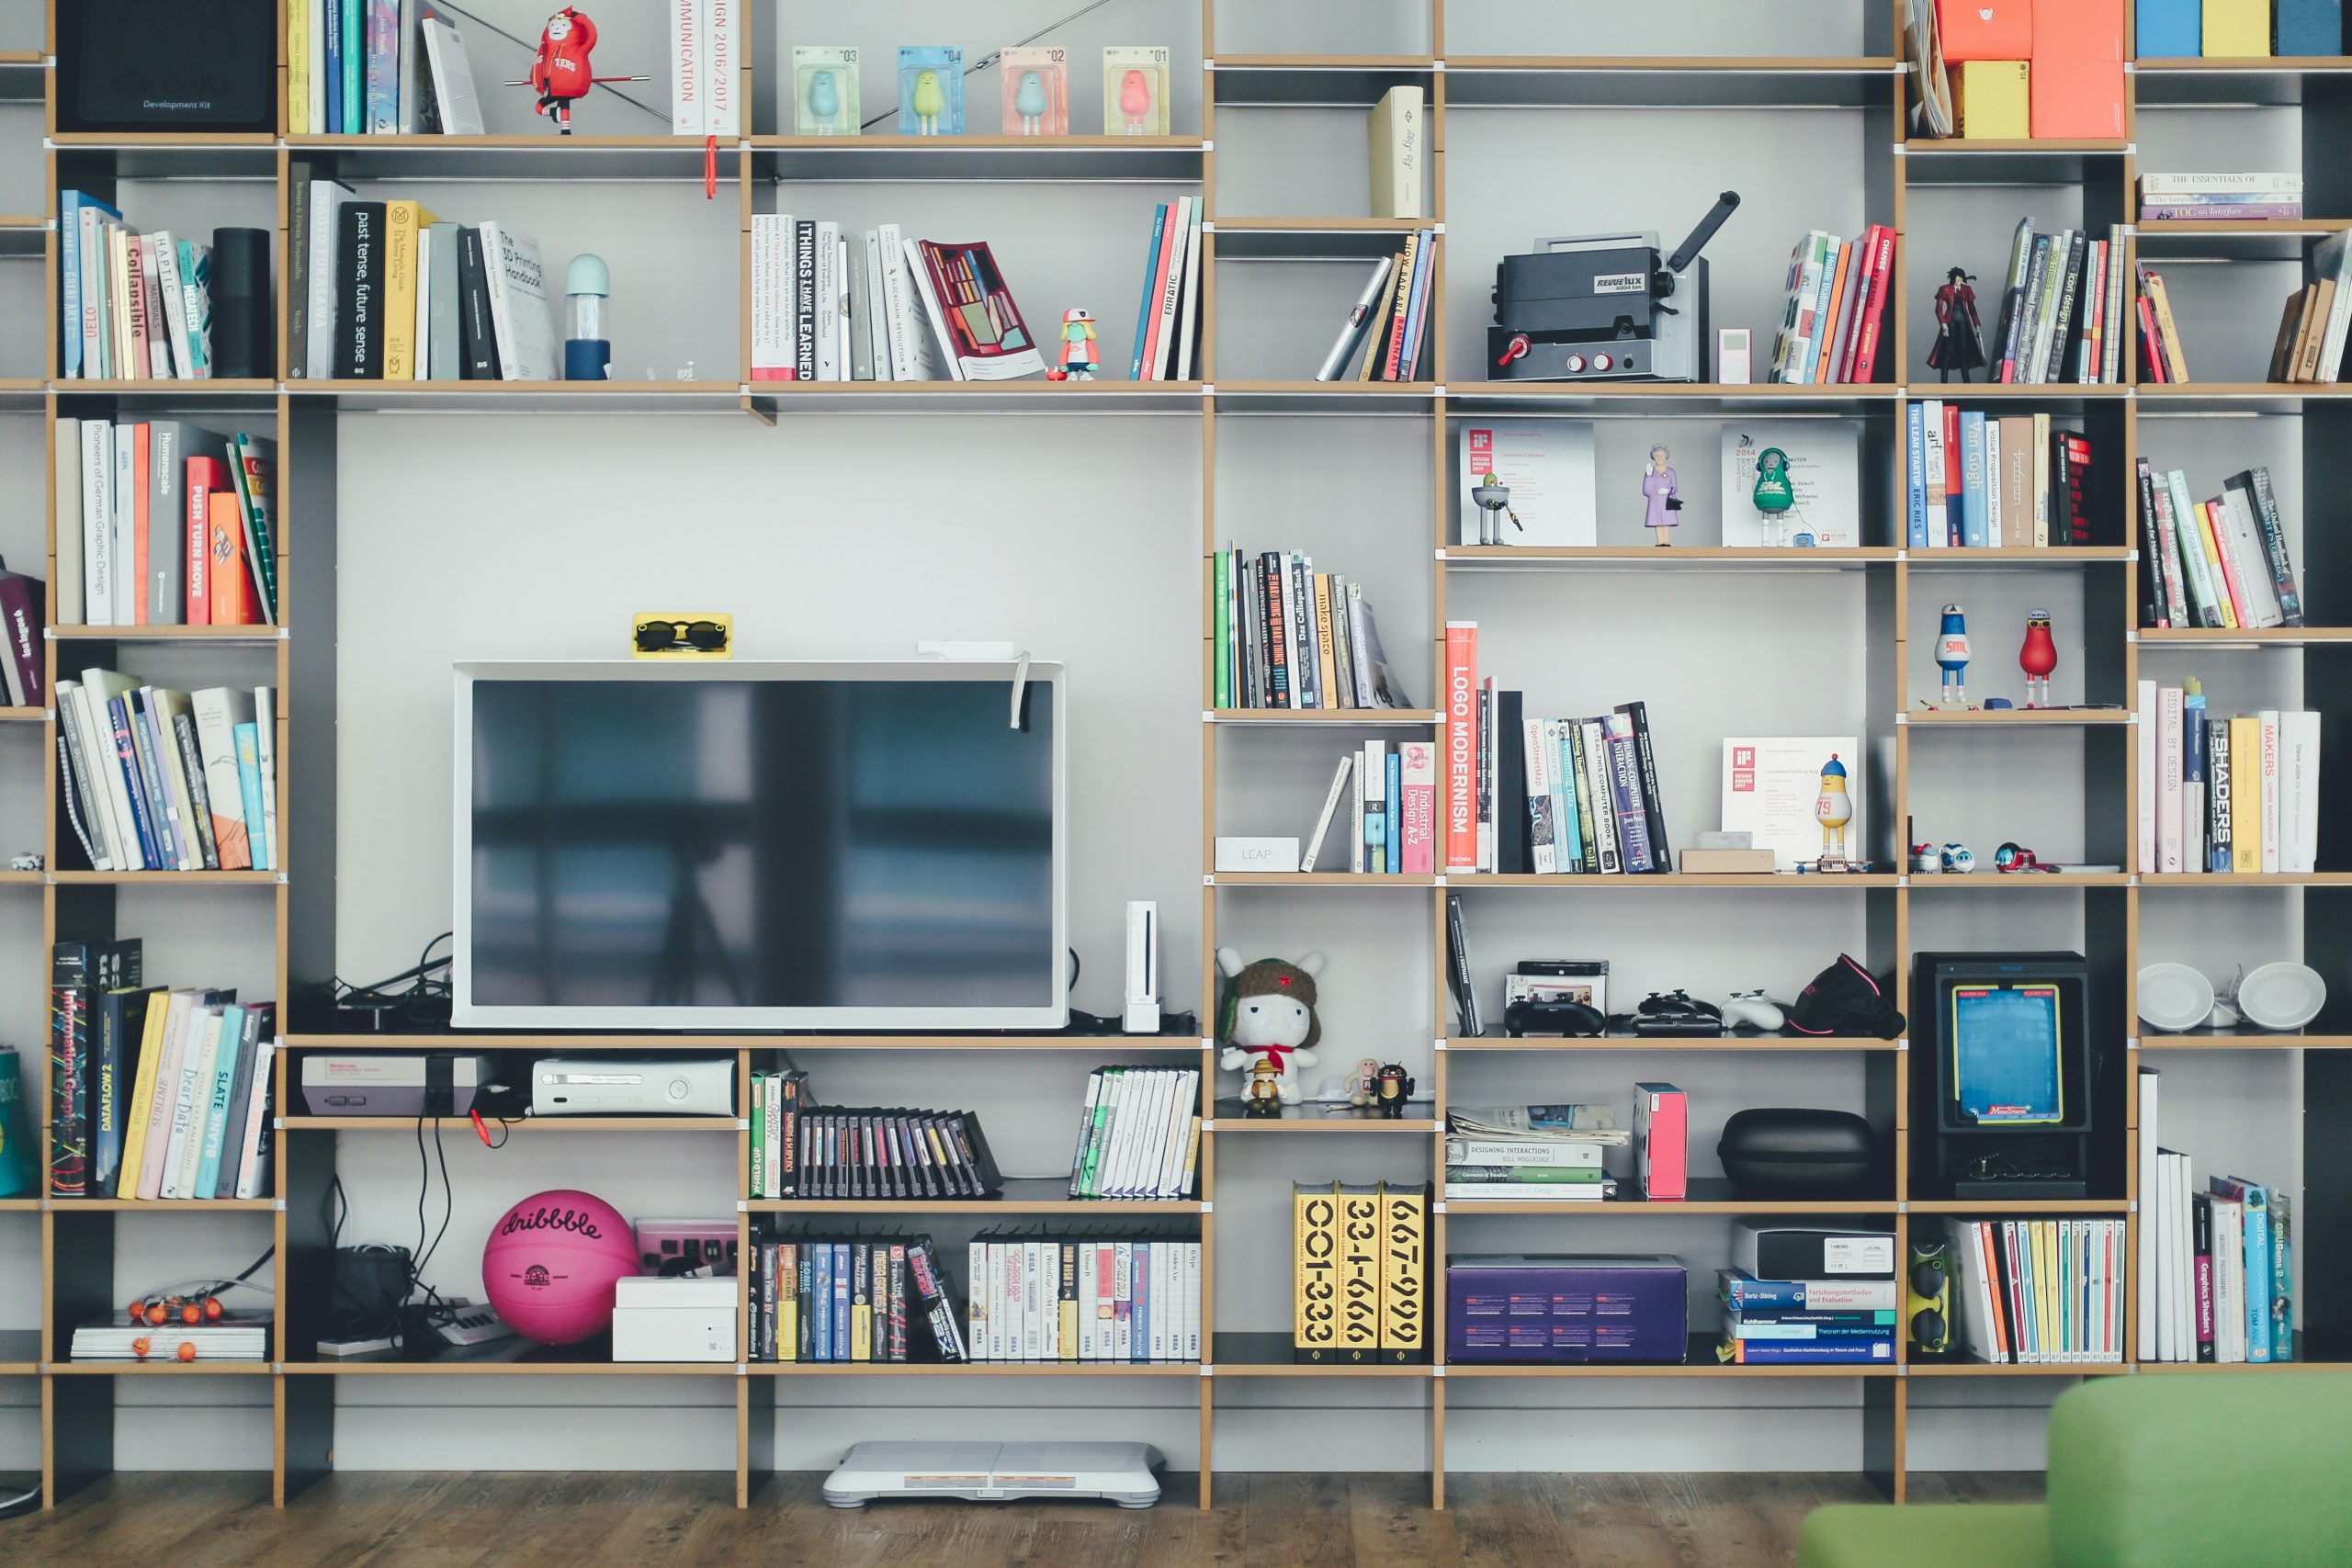 discover useful organization tips to declutter your space and streamline your life. learn how to be more productive and efficient with these organization tips.